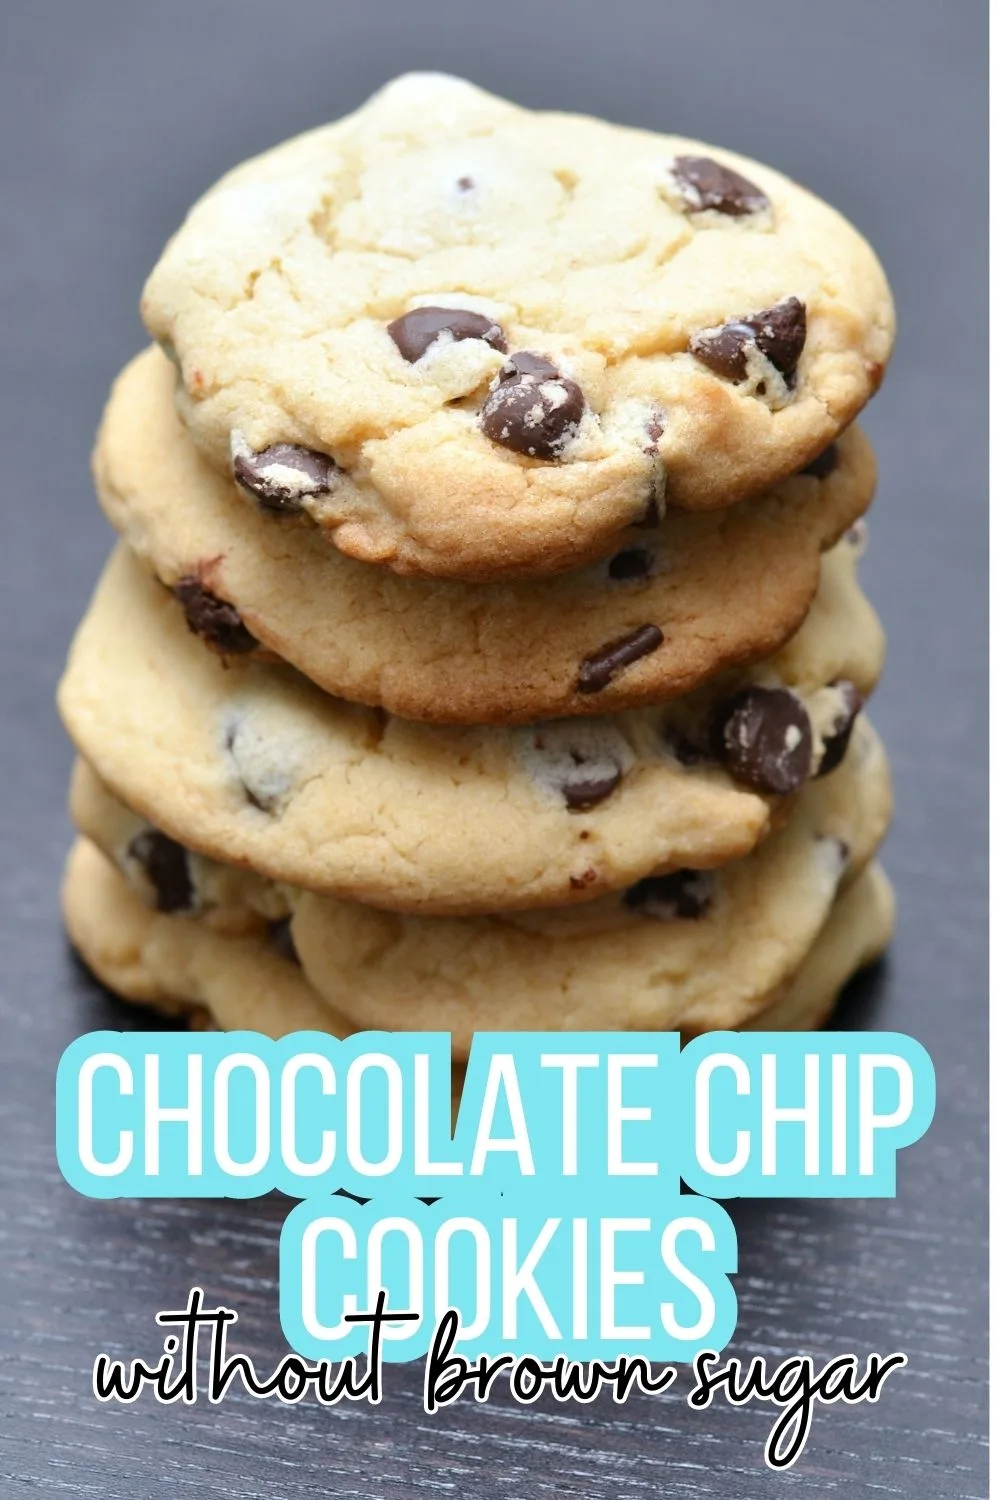 Chocolate Chip Cookies without brown sugar recipe